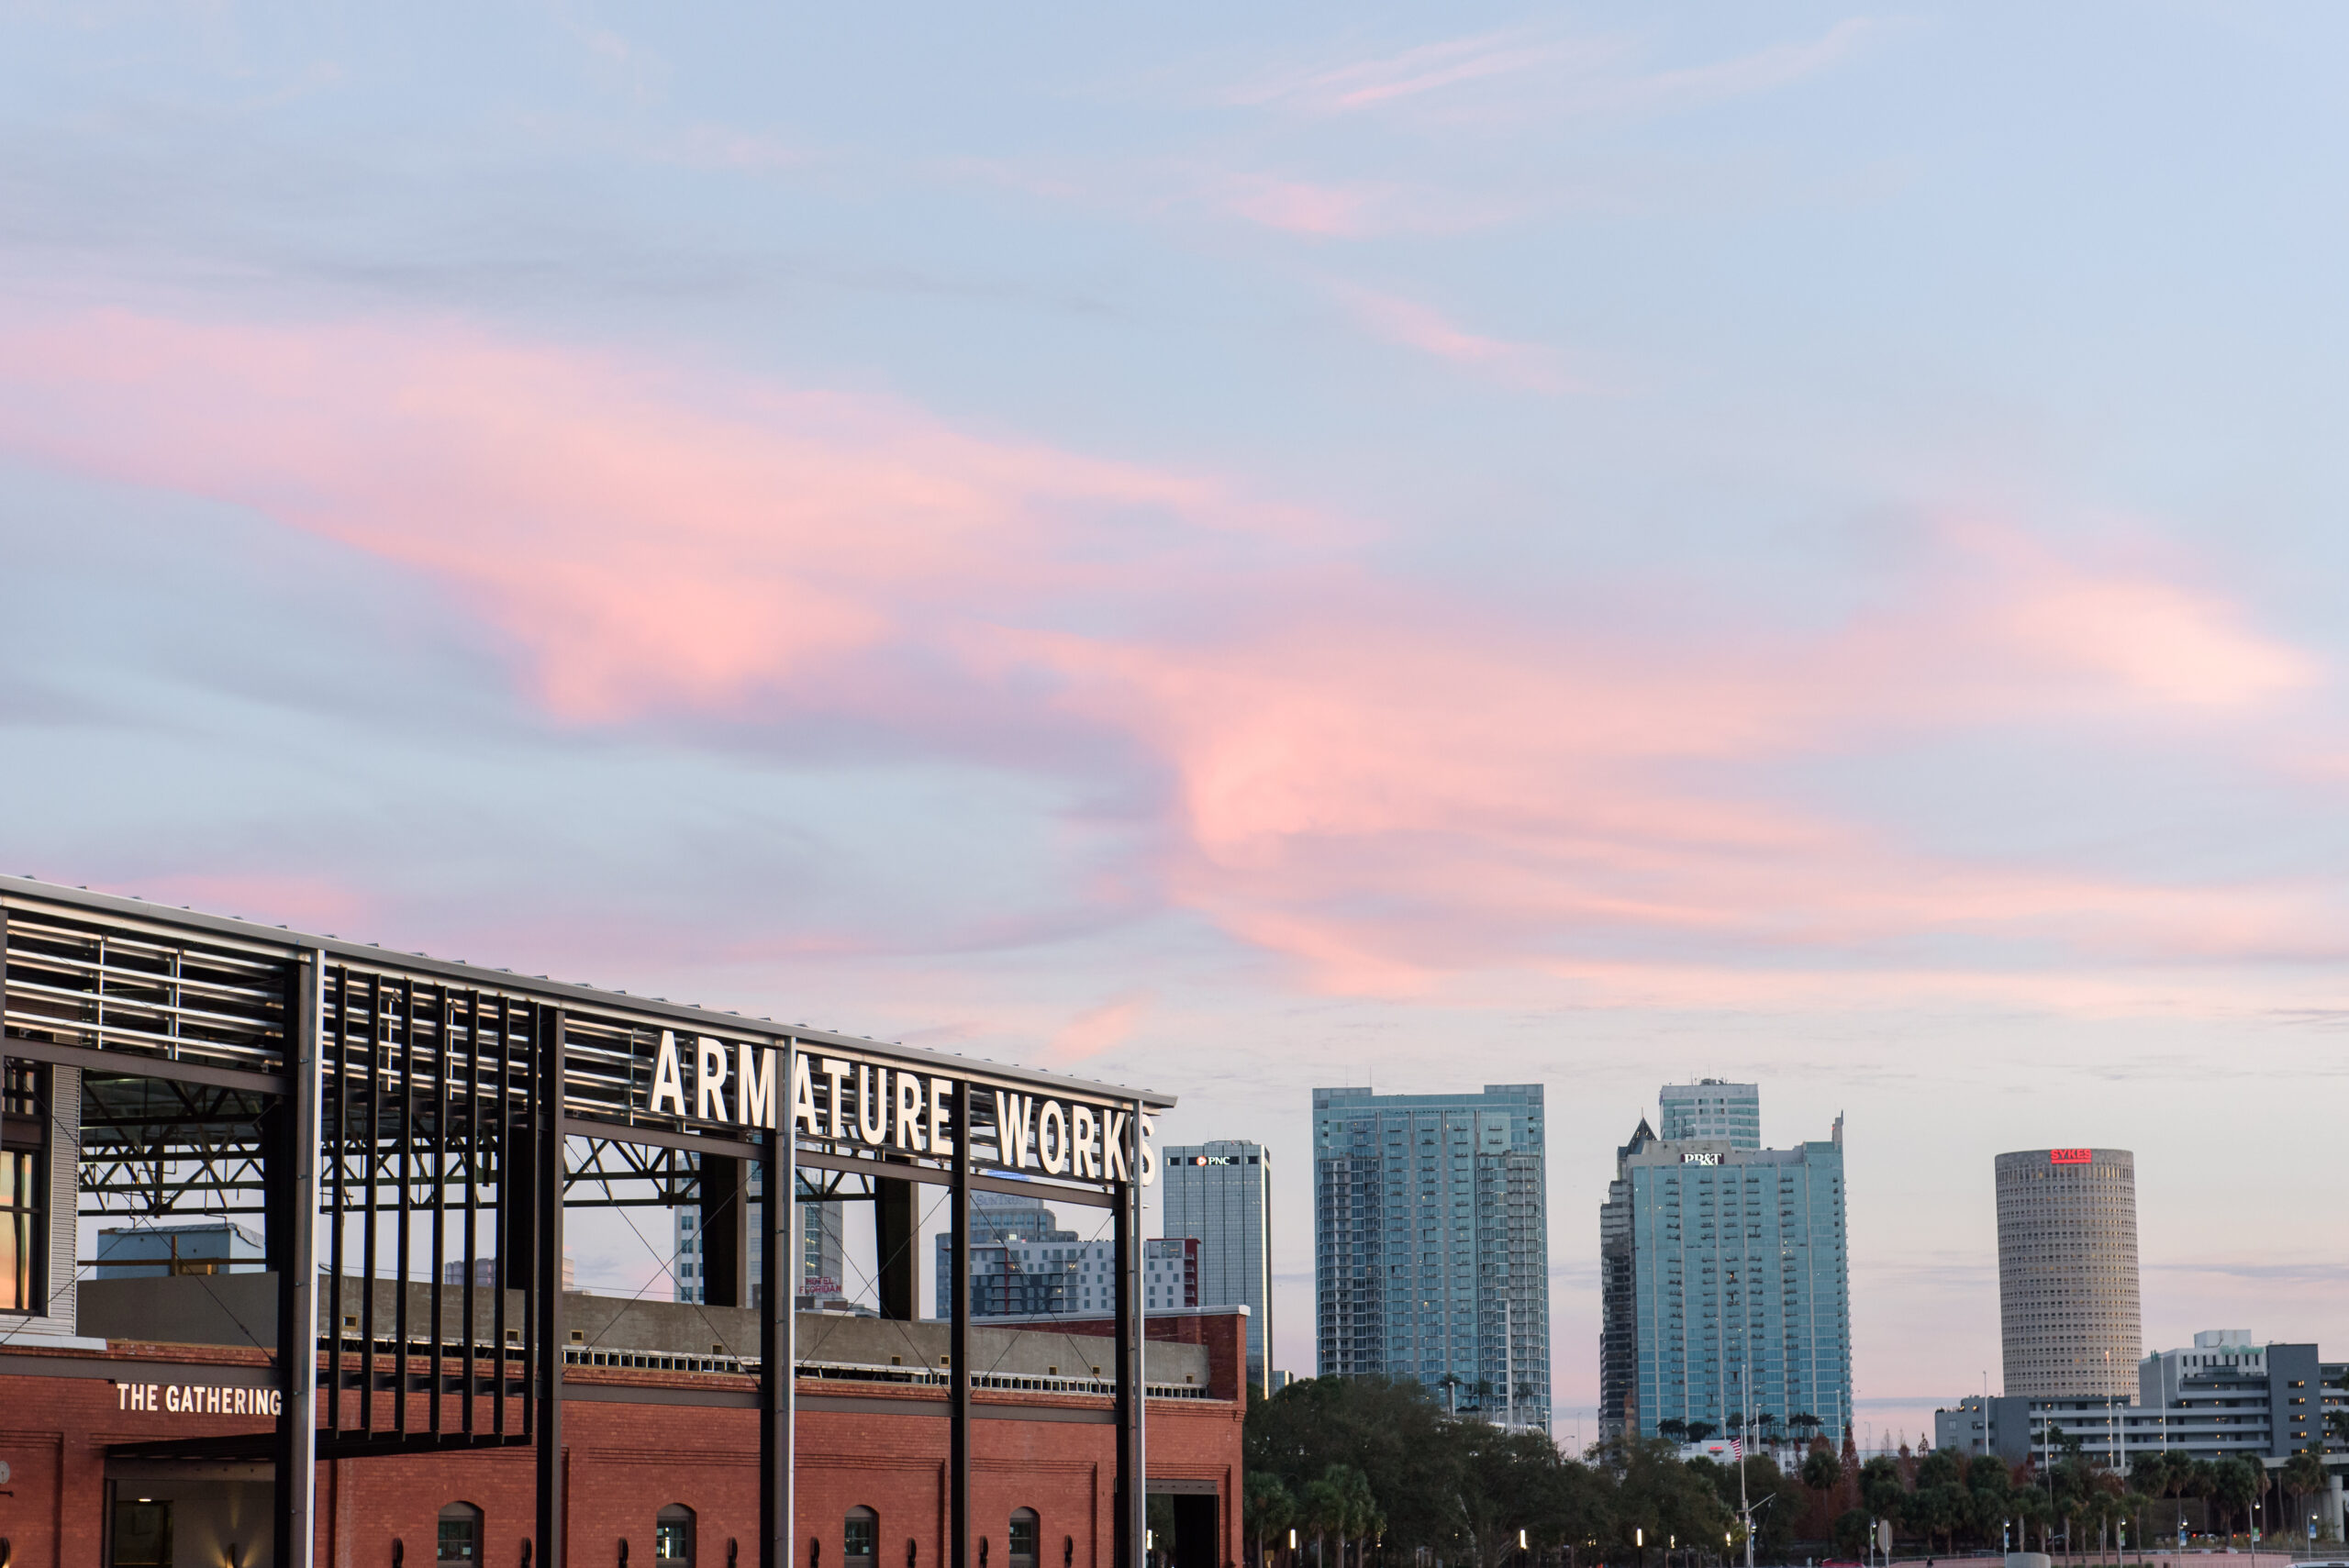 A picture of the Tampa skyline during sunset with the Armature Works building in the foreground.